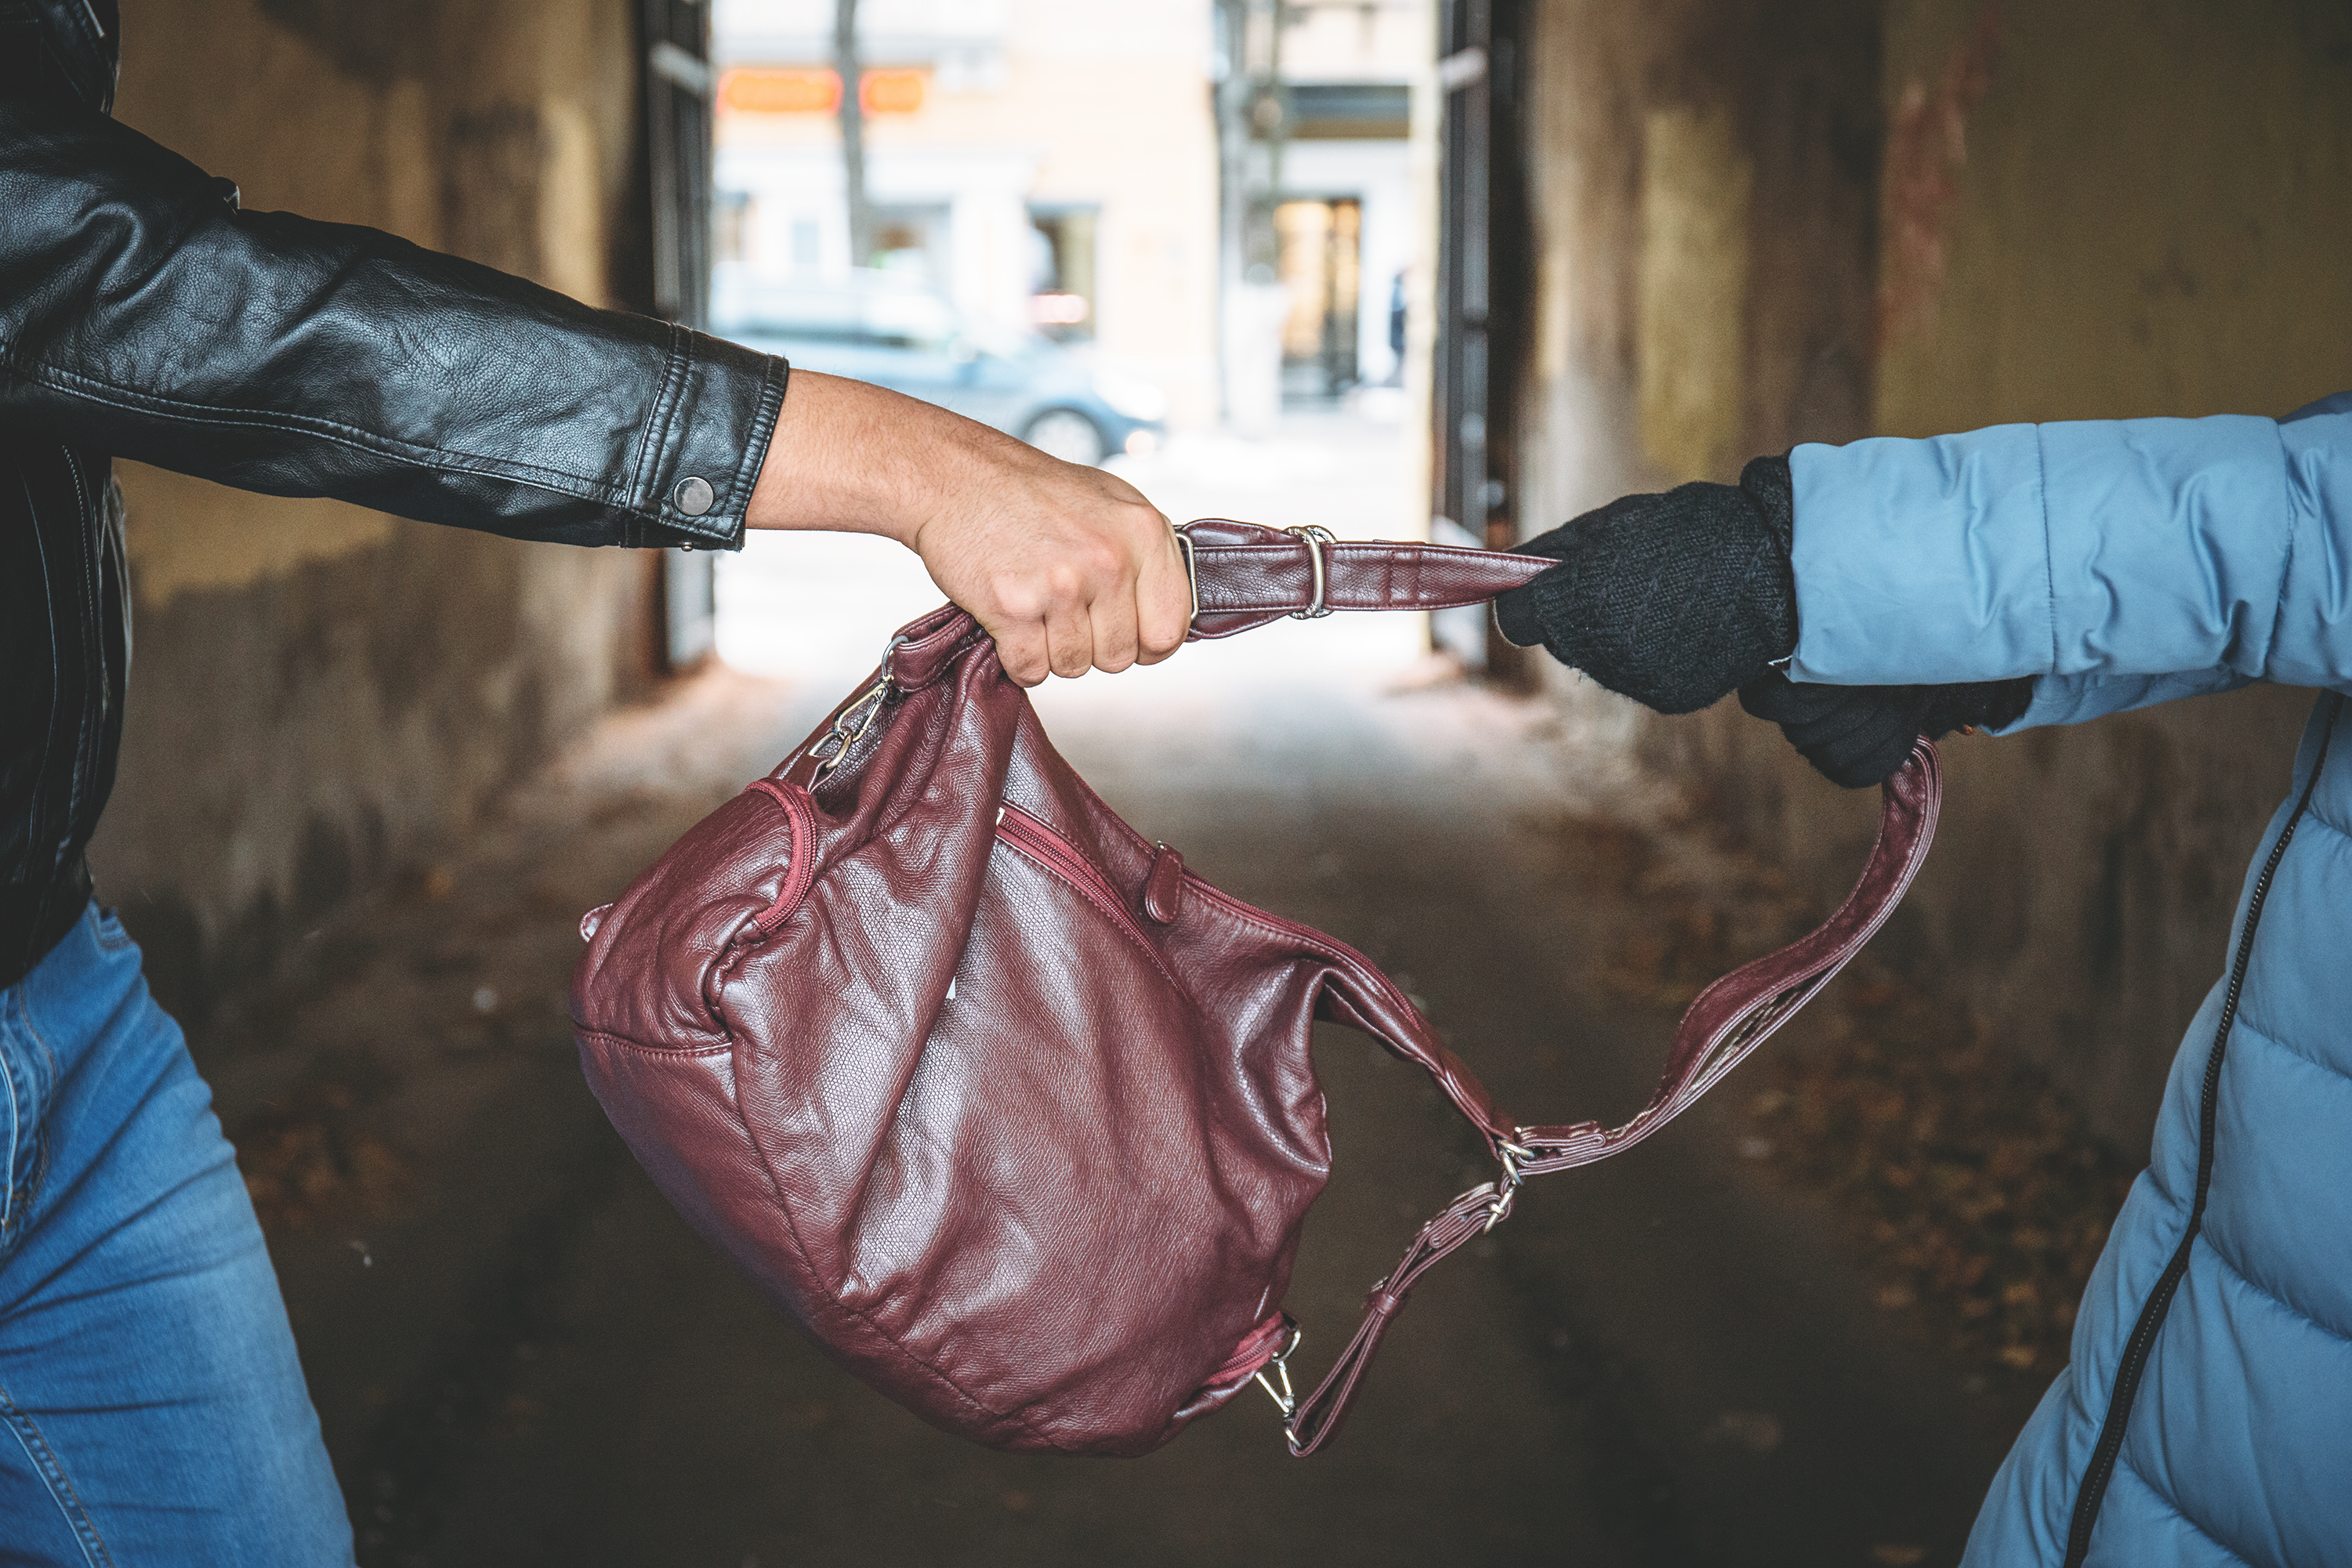 Robber snatches bag | Source: Shutterstock